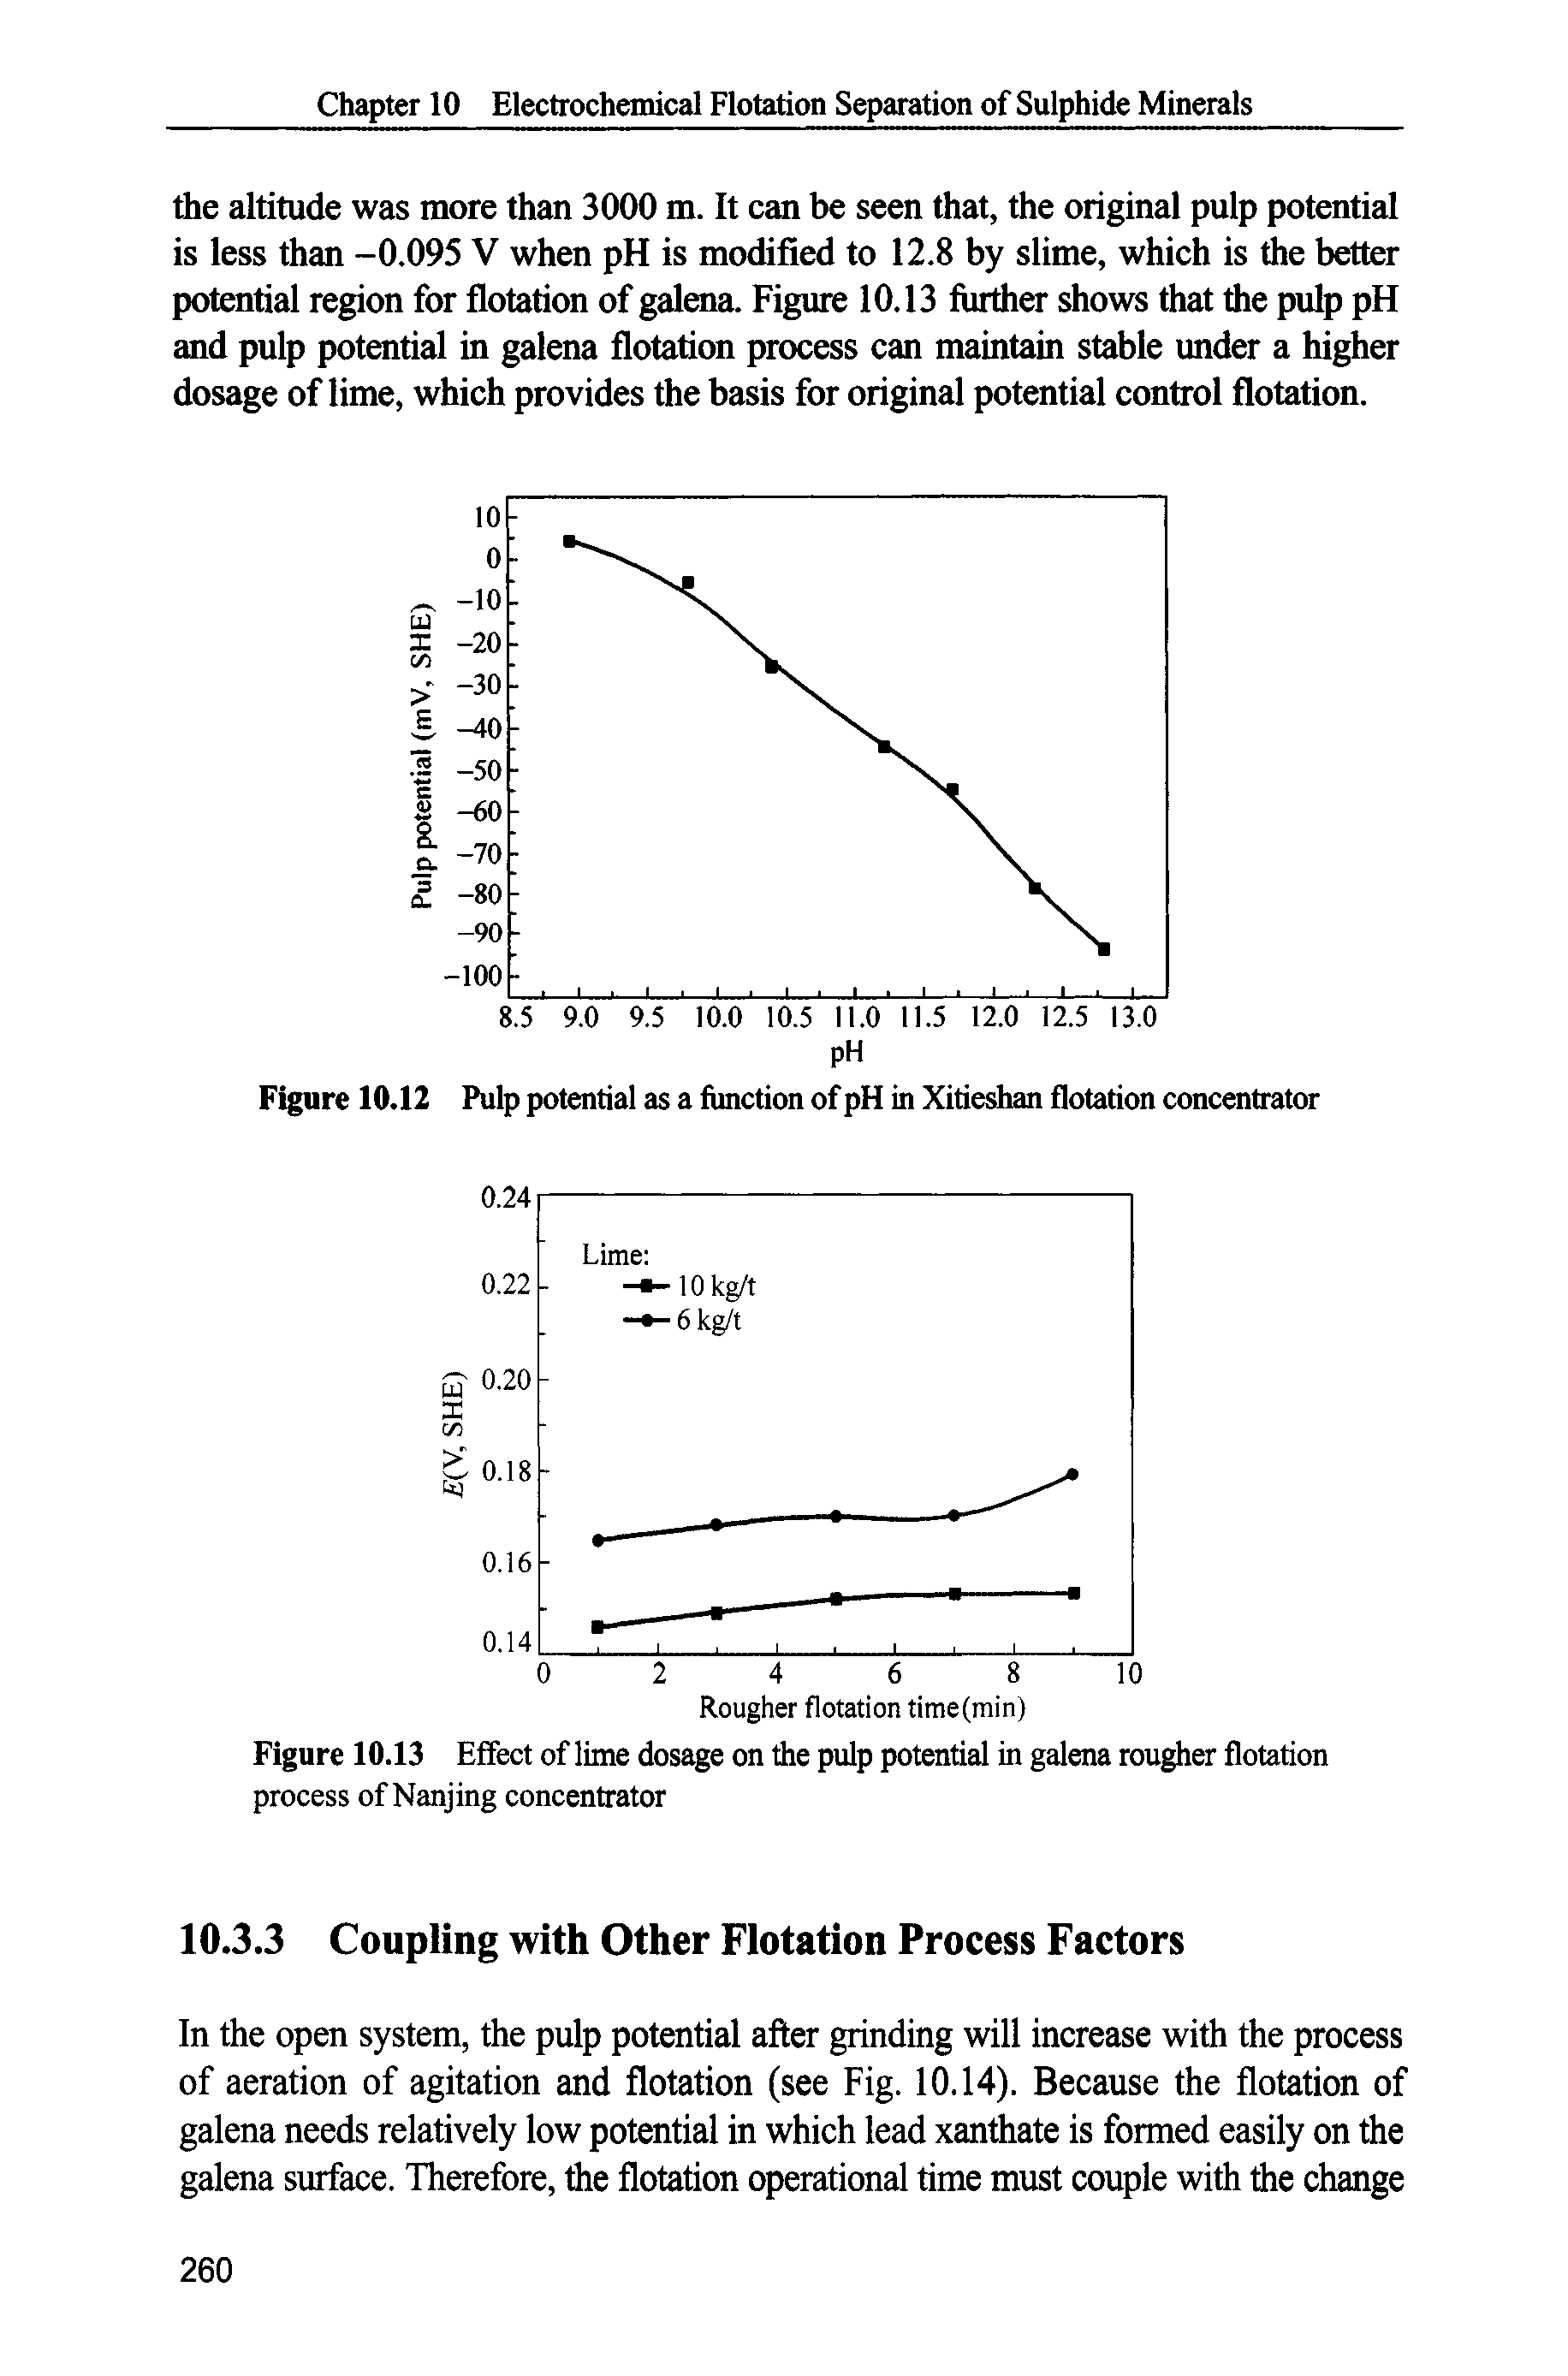 Figure 10.12 Pulp potential as a function of pH in Xitieshan flotation concentrator...